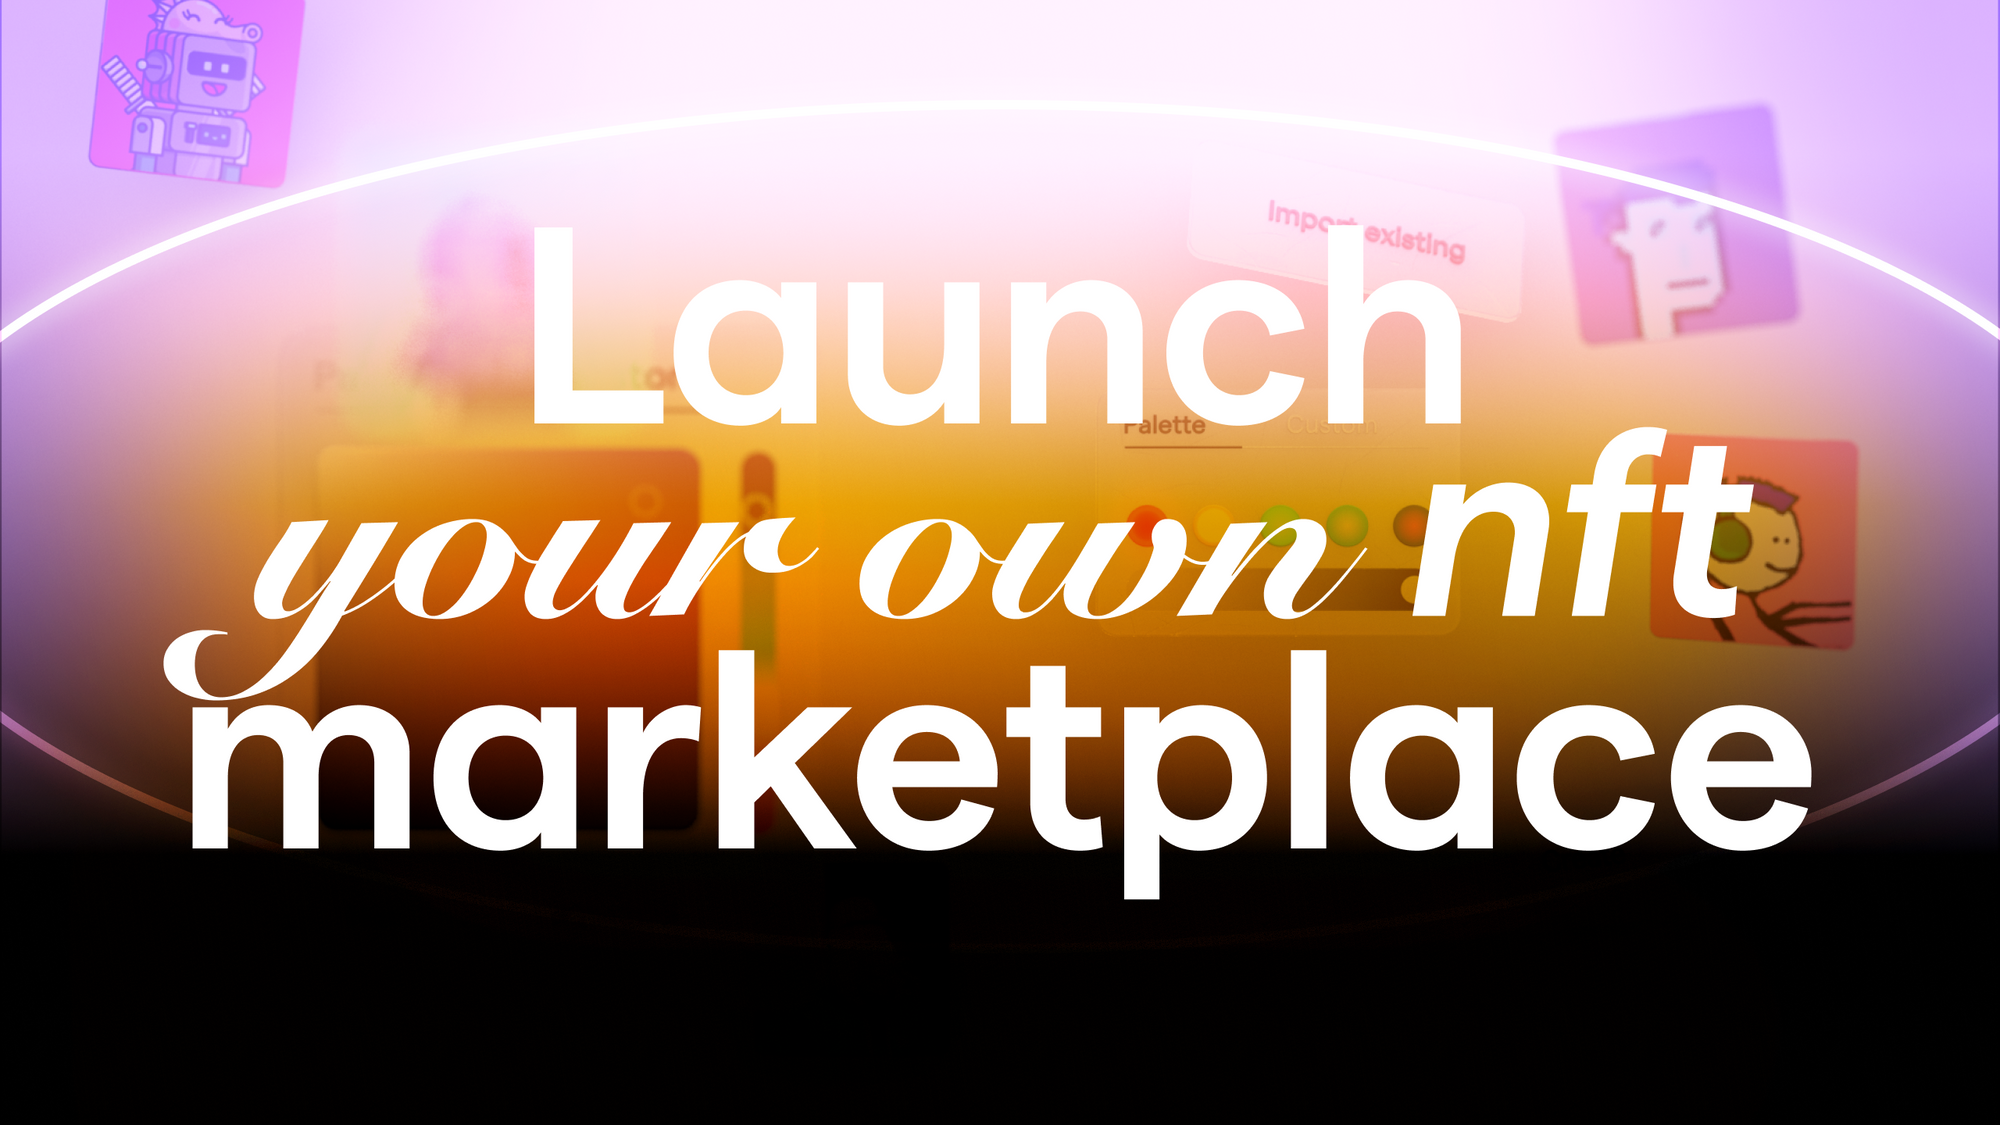 Launch your own NFT marketplace by pressing one button. Yes, really.